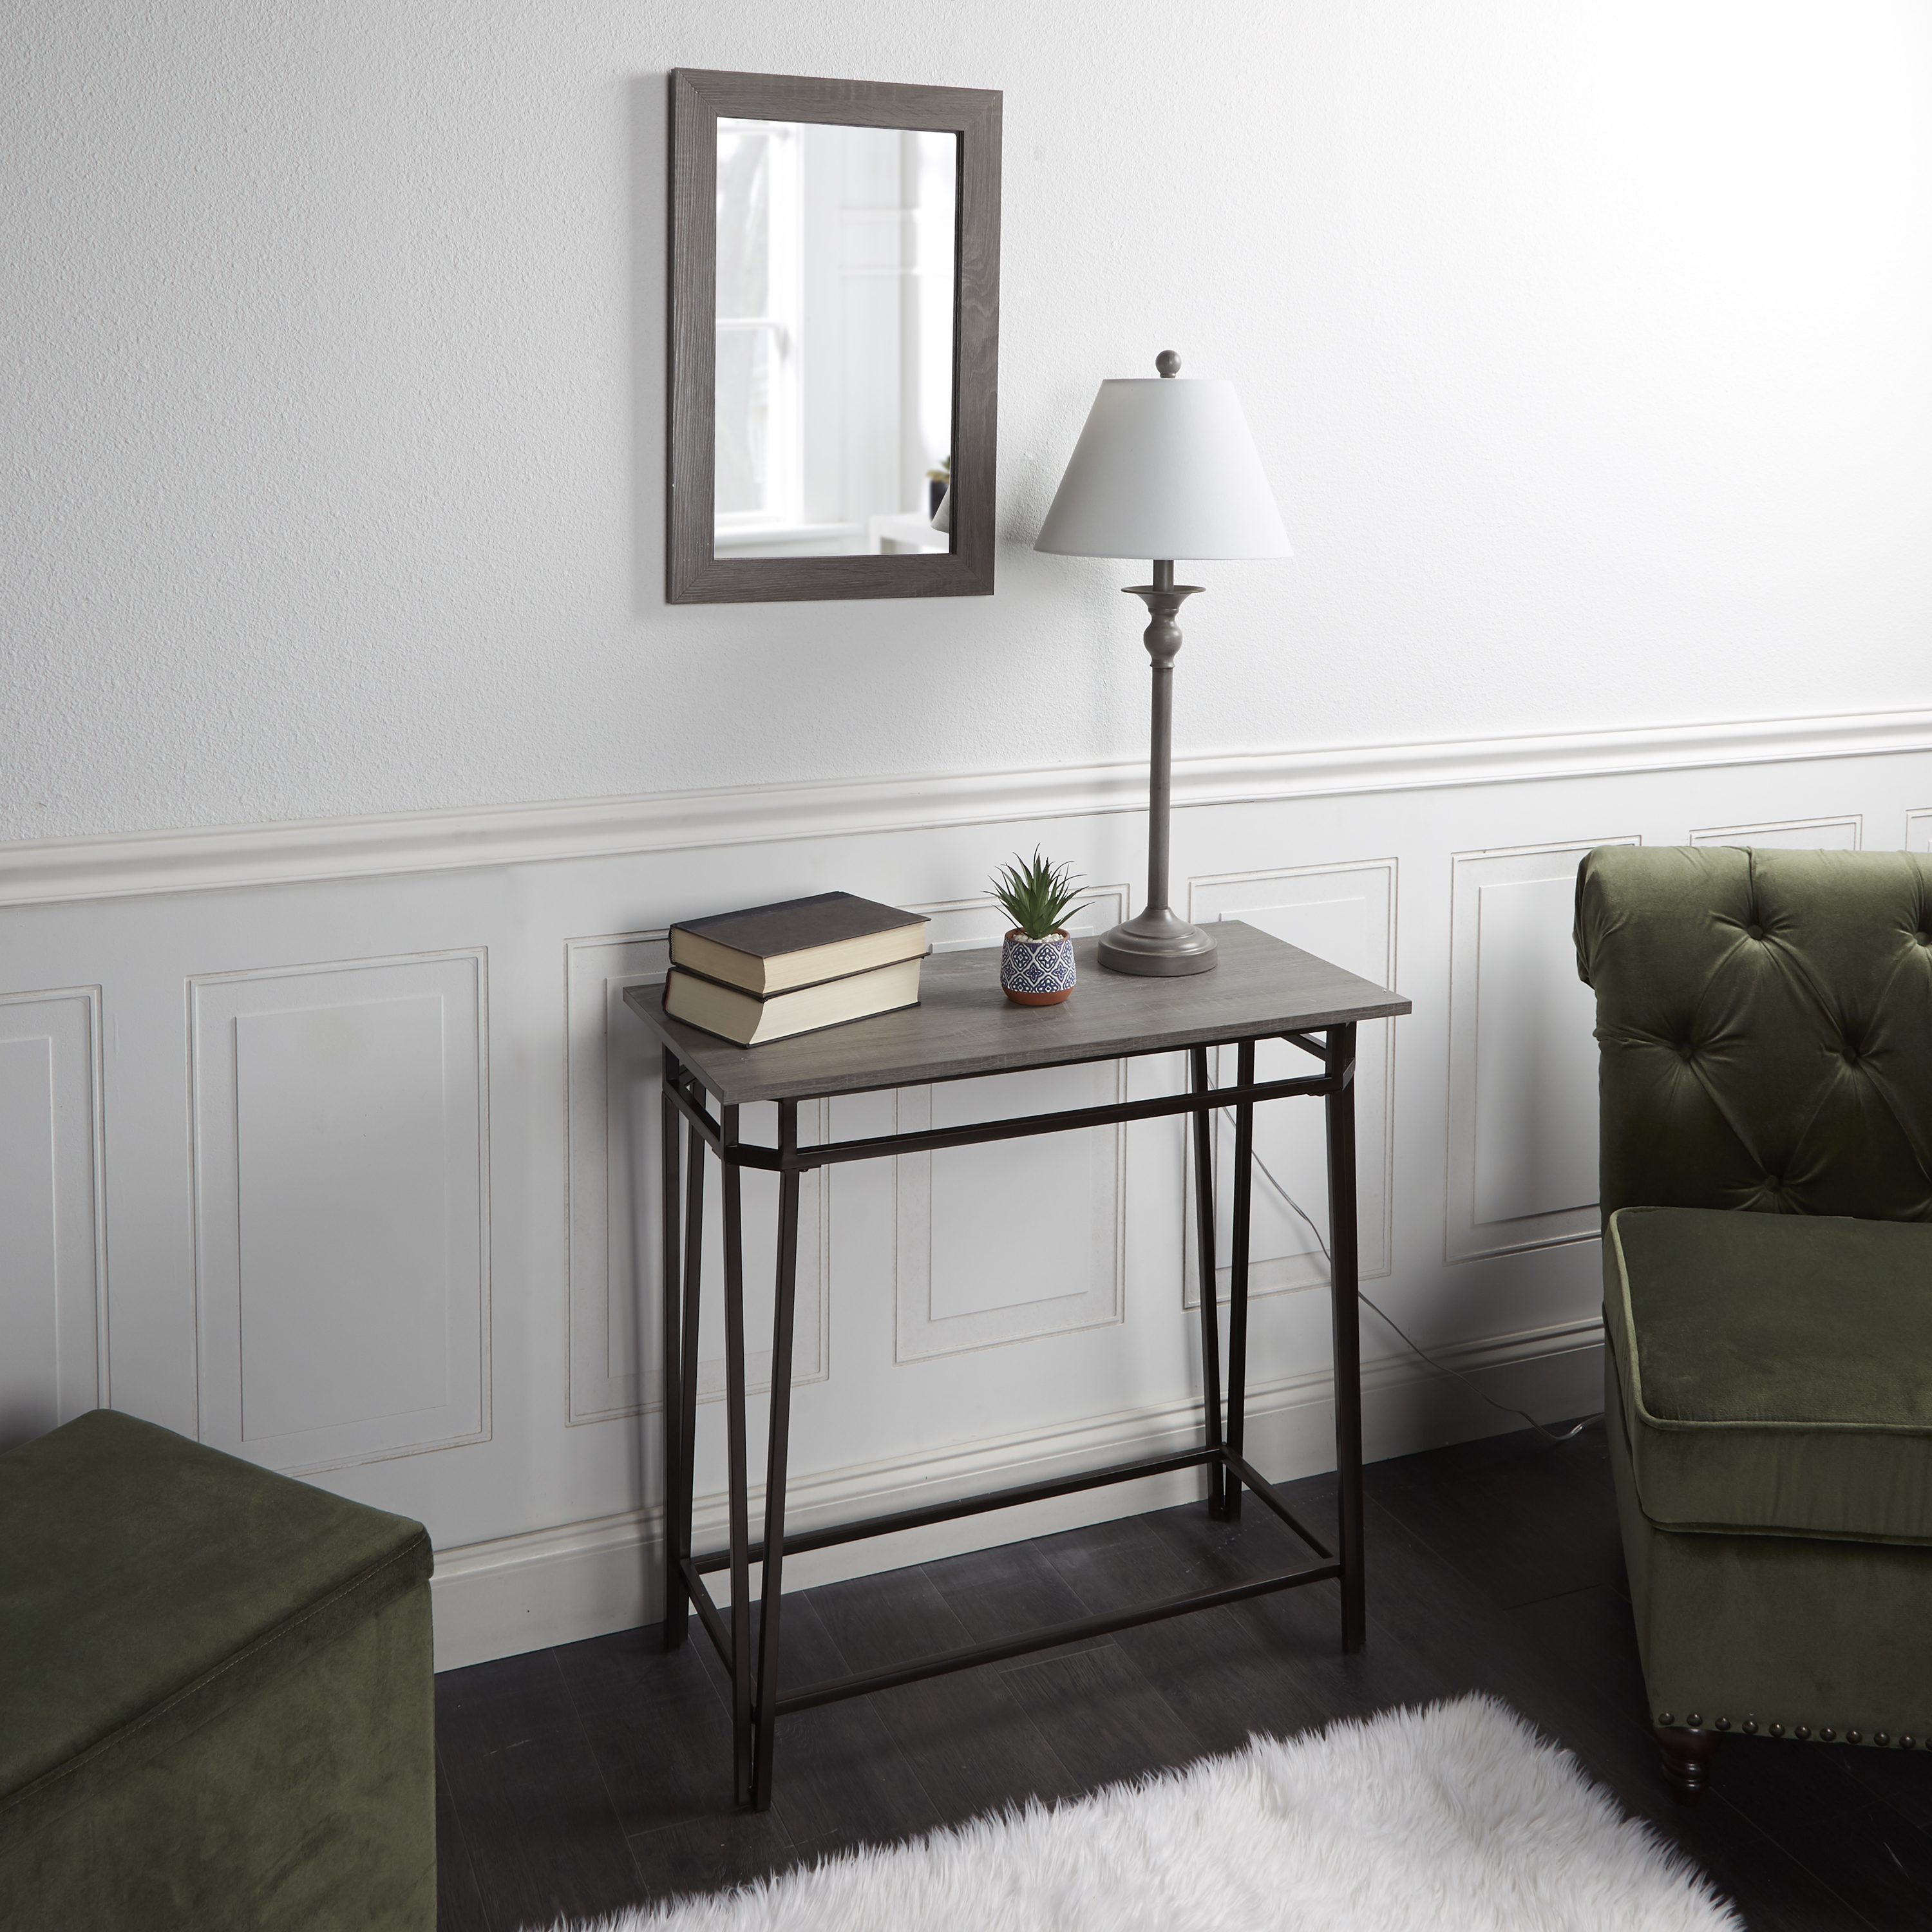 Console Table, Lamp & Mirror 3 Piece Set by Adornments - image 1 of 8